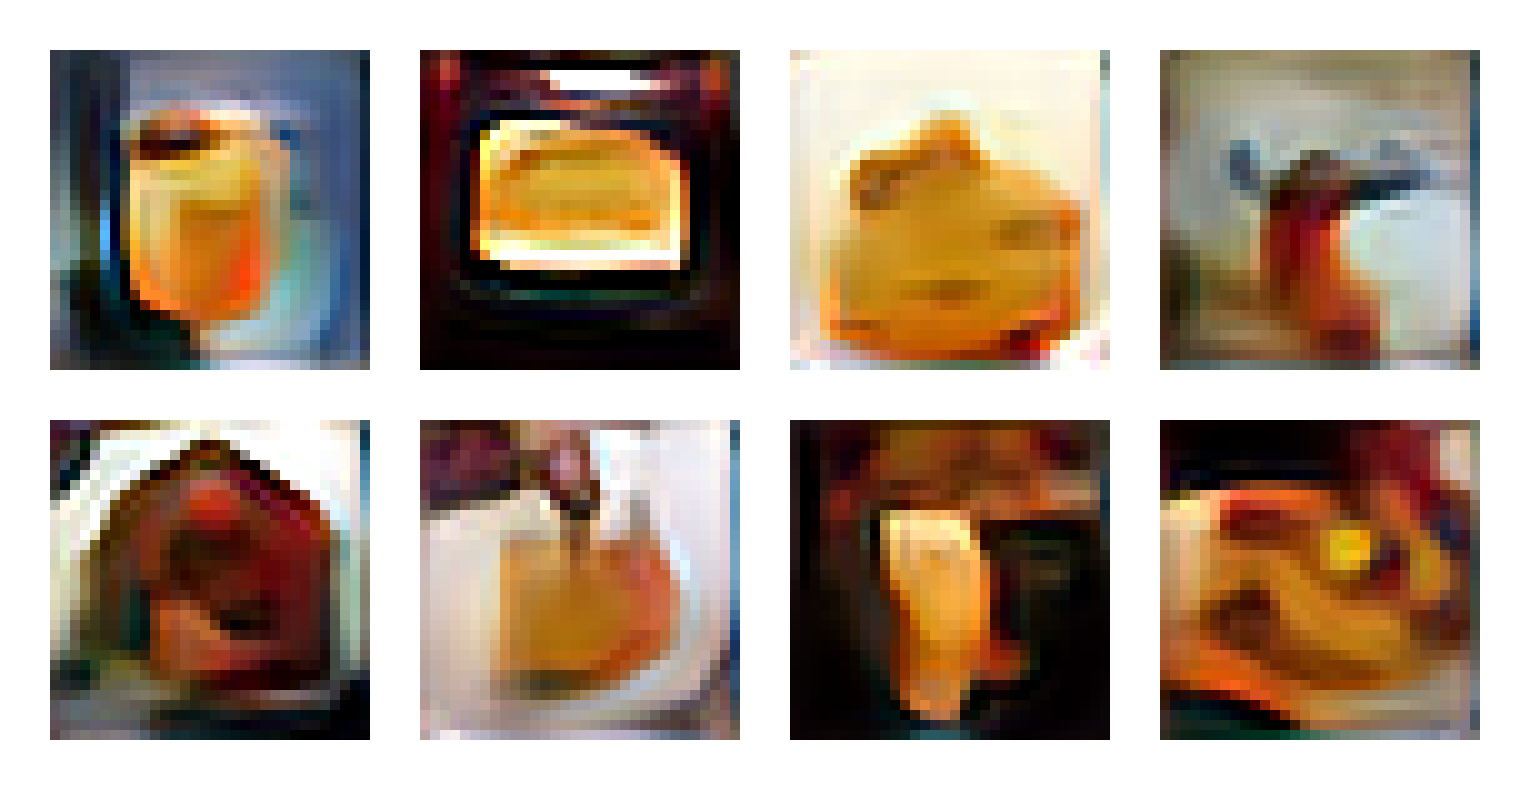 A grid of eight images, each showing heavily pixelated yellow blobs against light or dark backgrounds